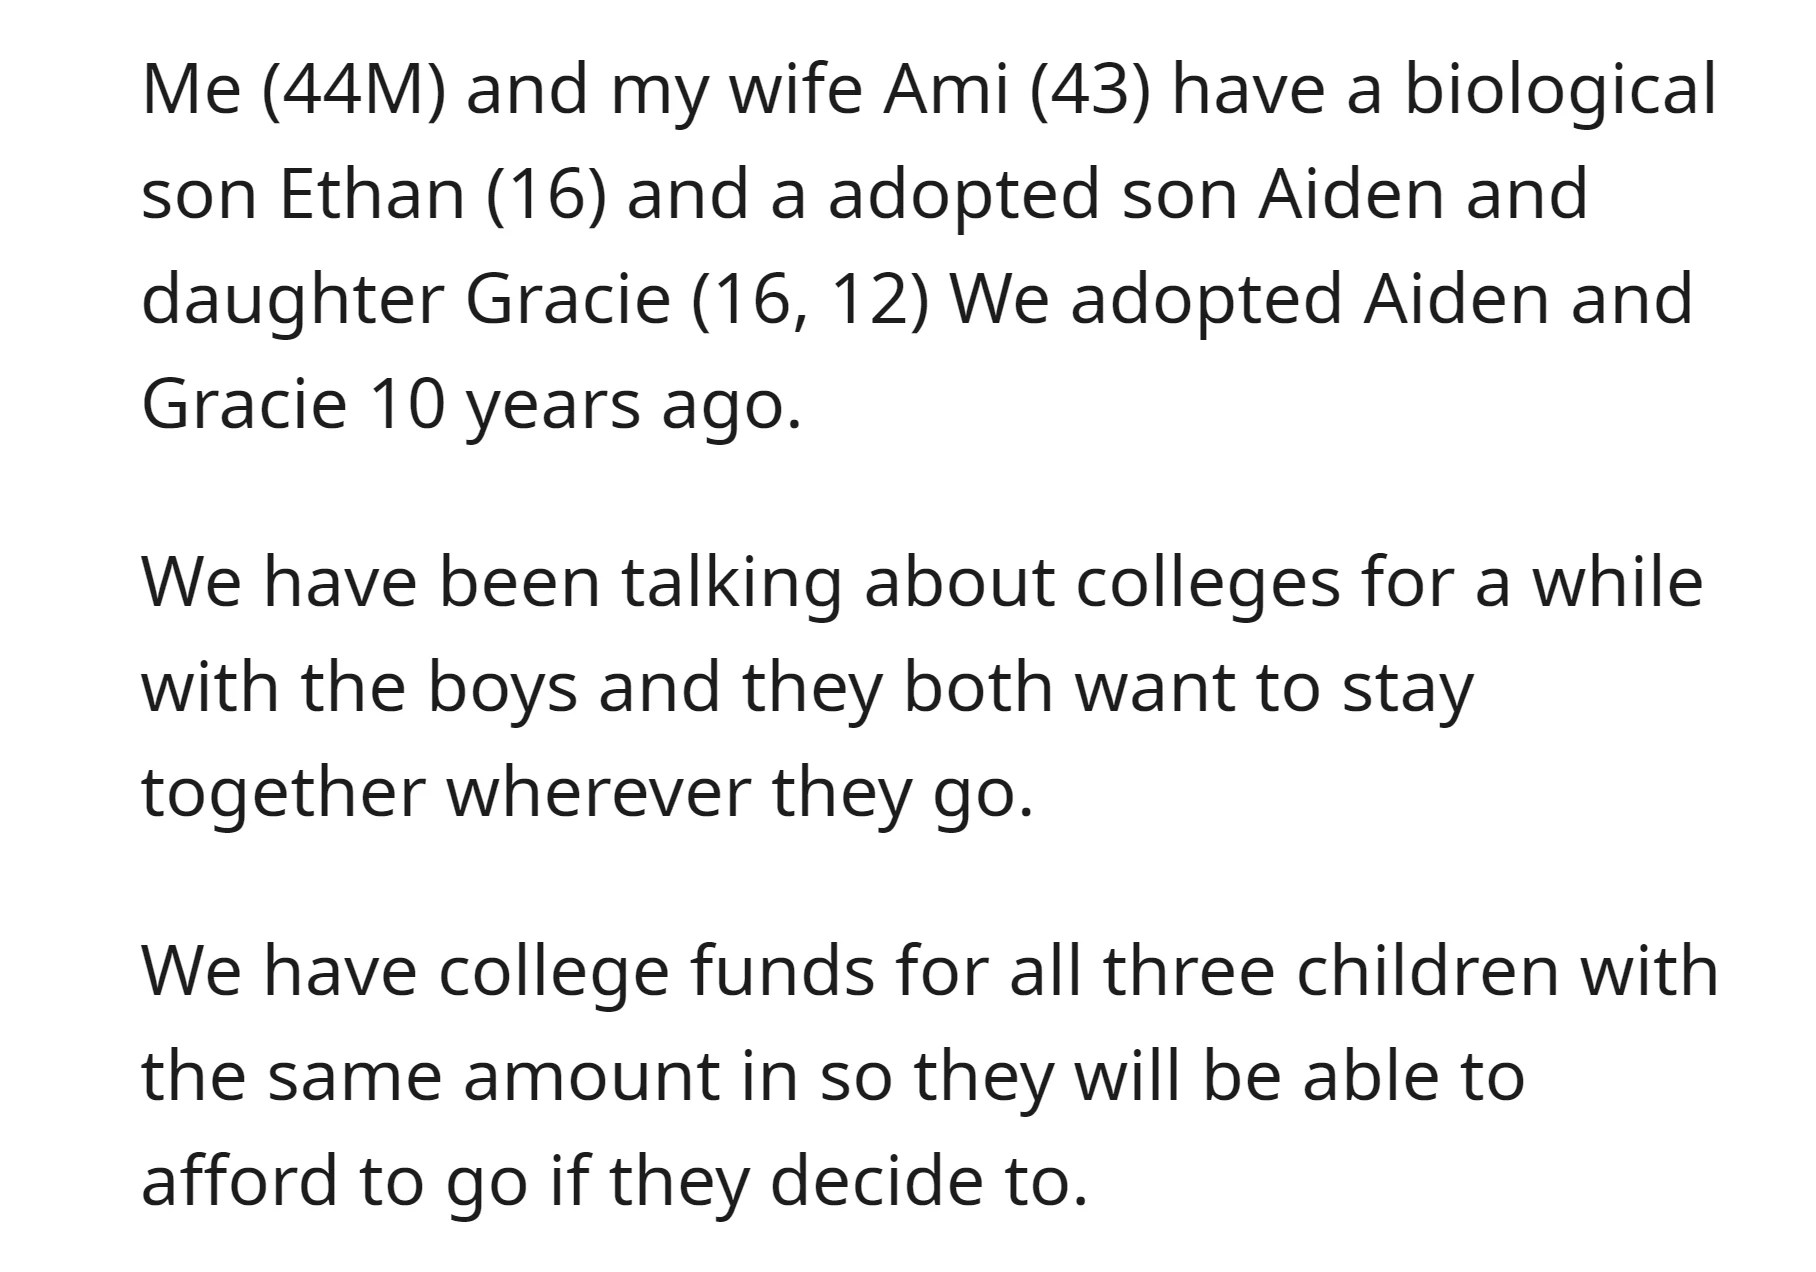 OP has equal college funds for all three children